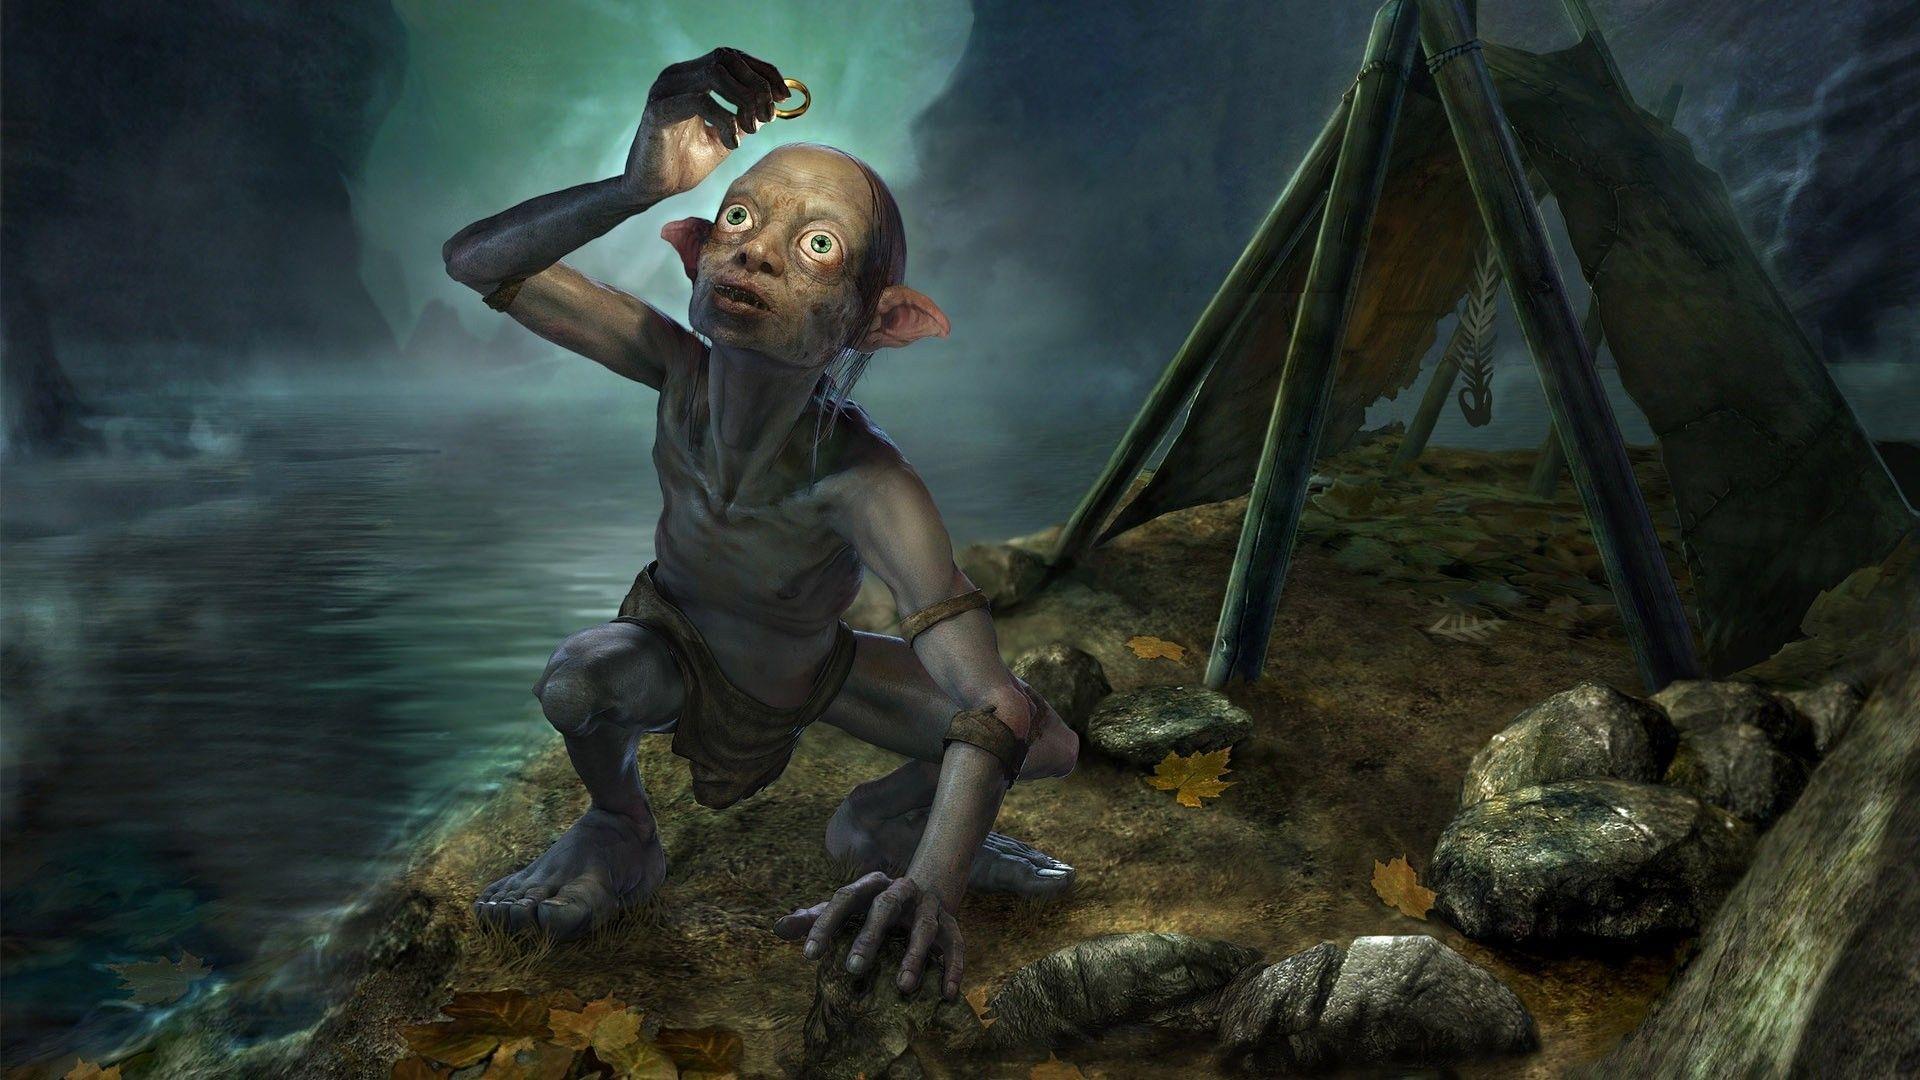 Smeagol Lord of the Rings wallpaper #